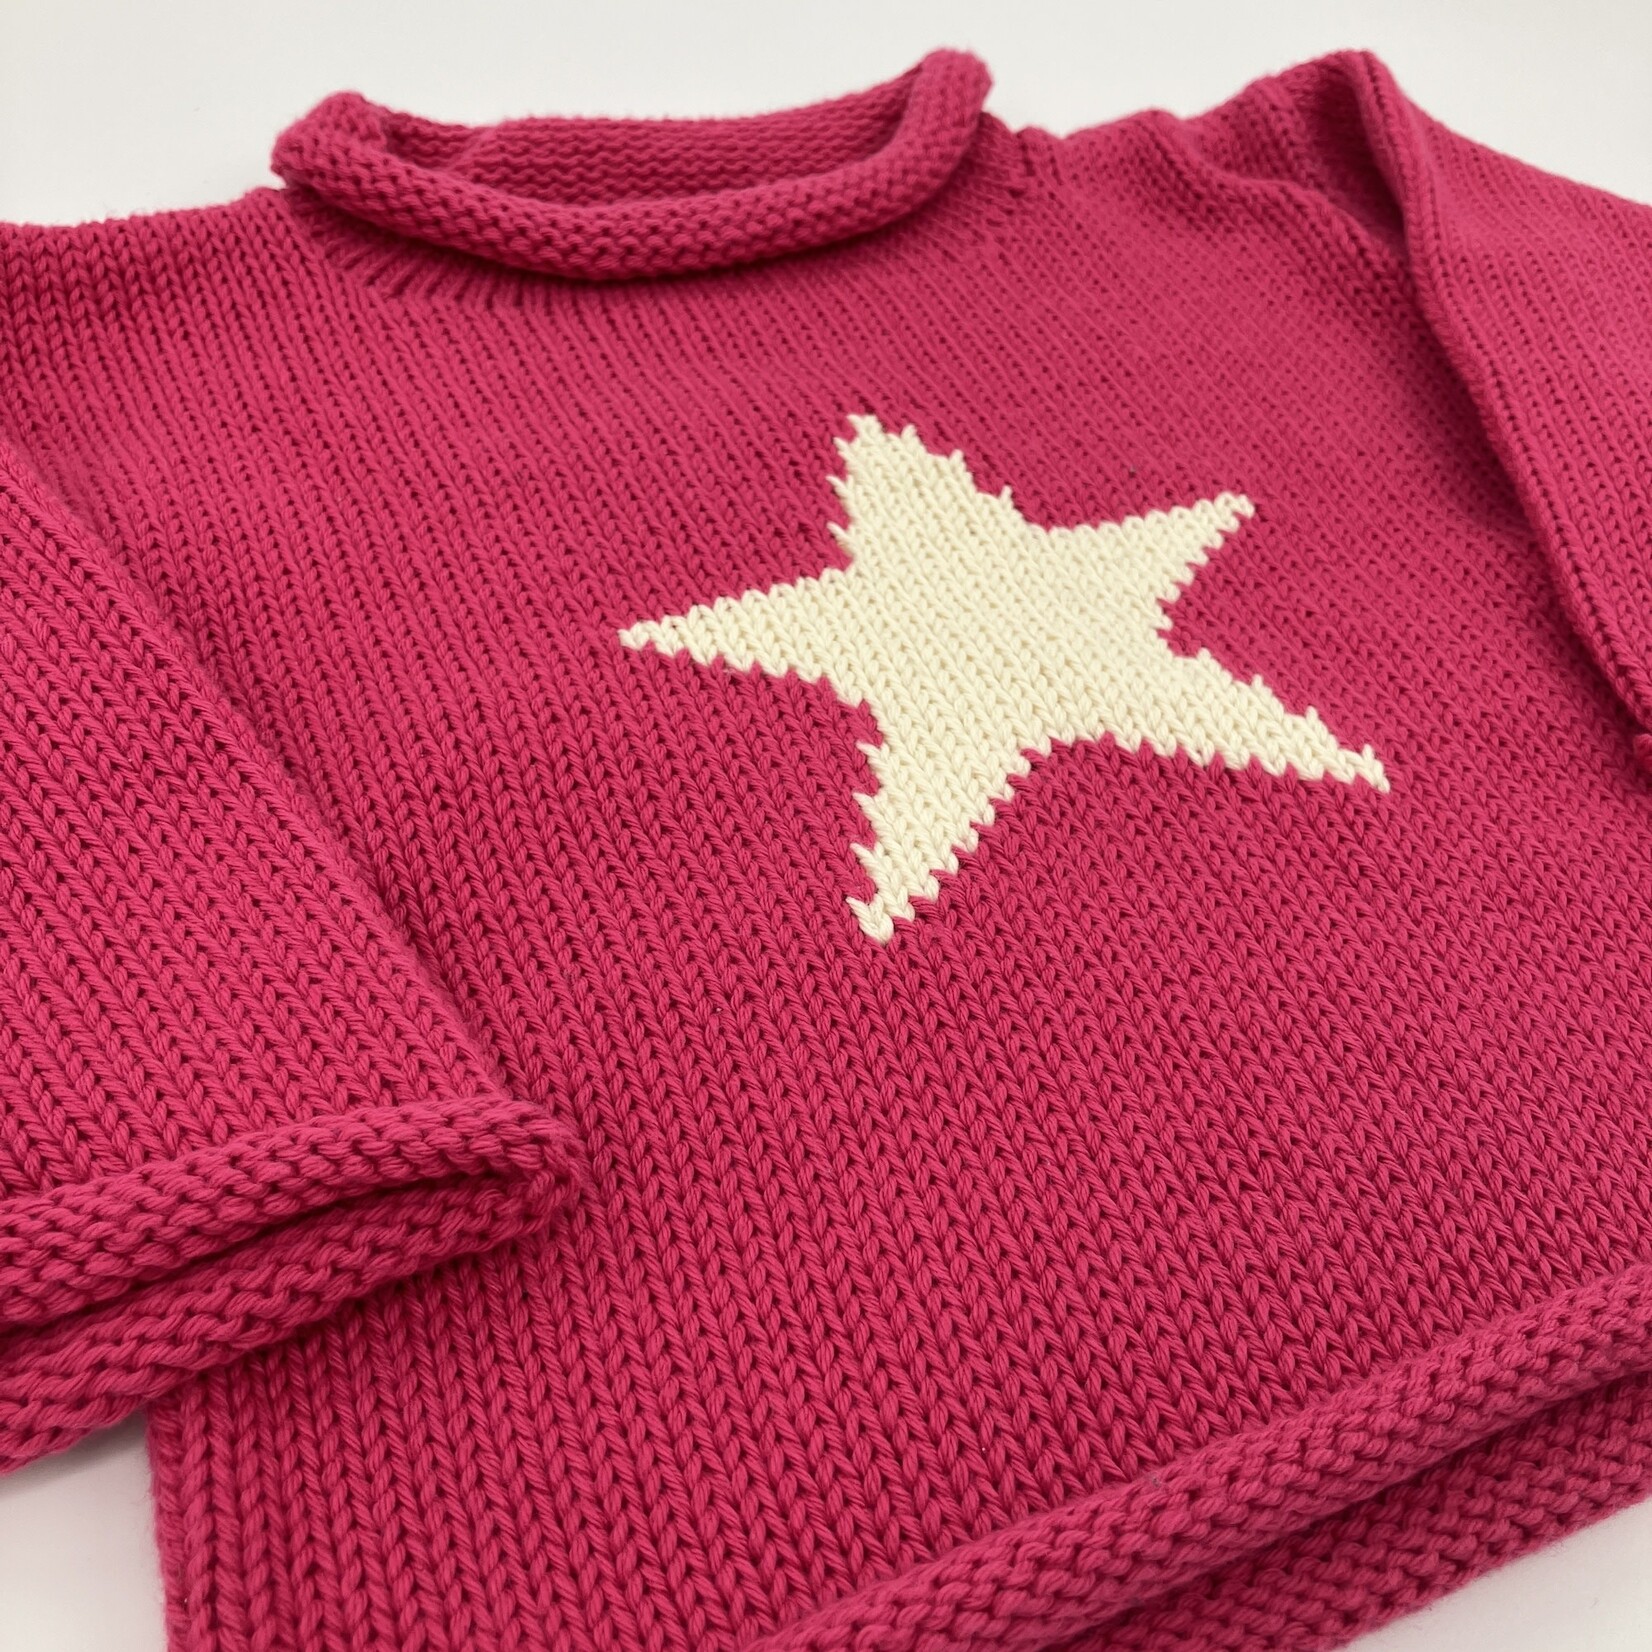 ACVISA/CLAVER Pink Sweater with White Star